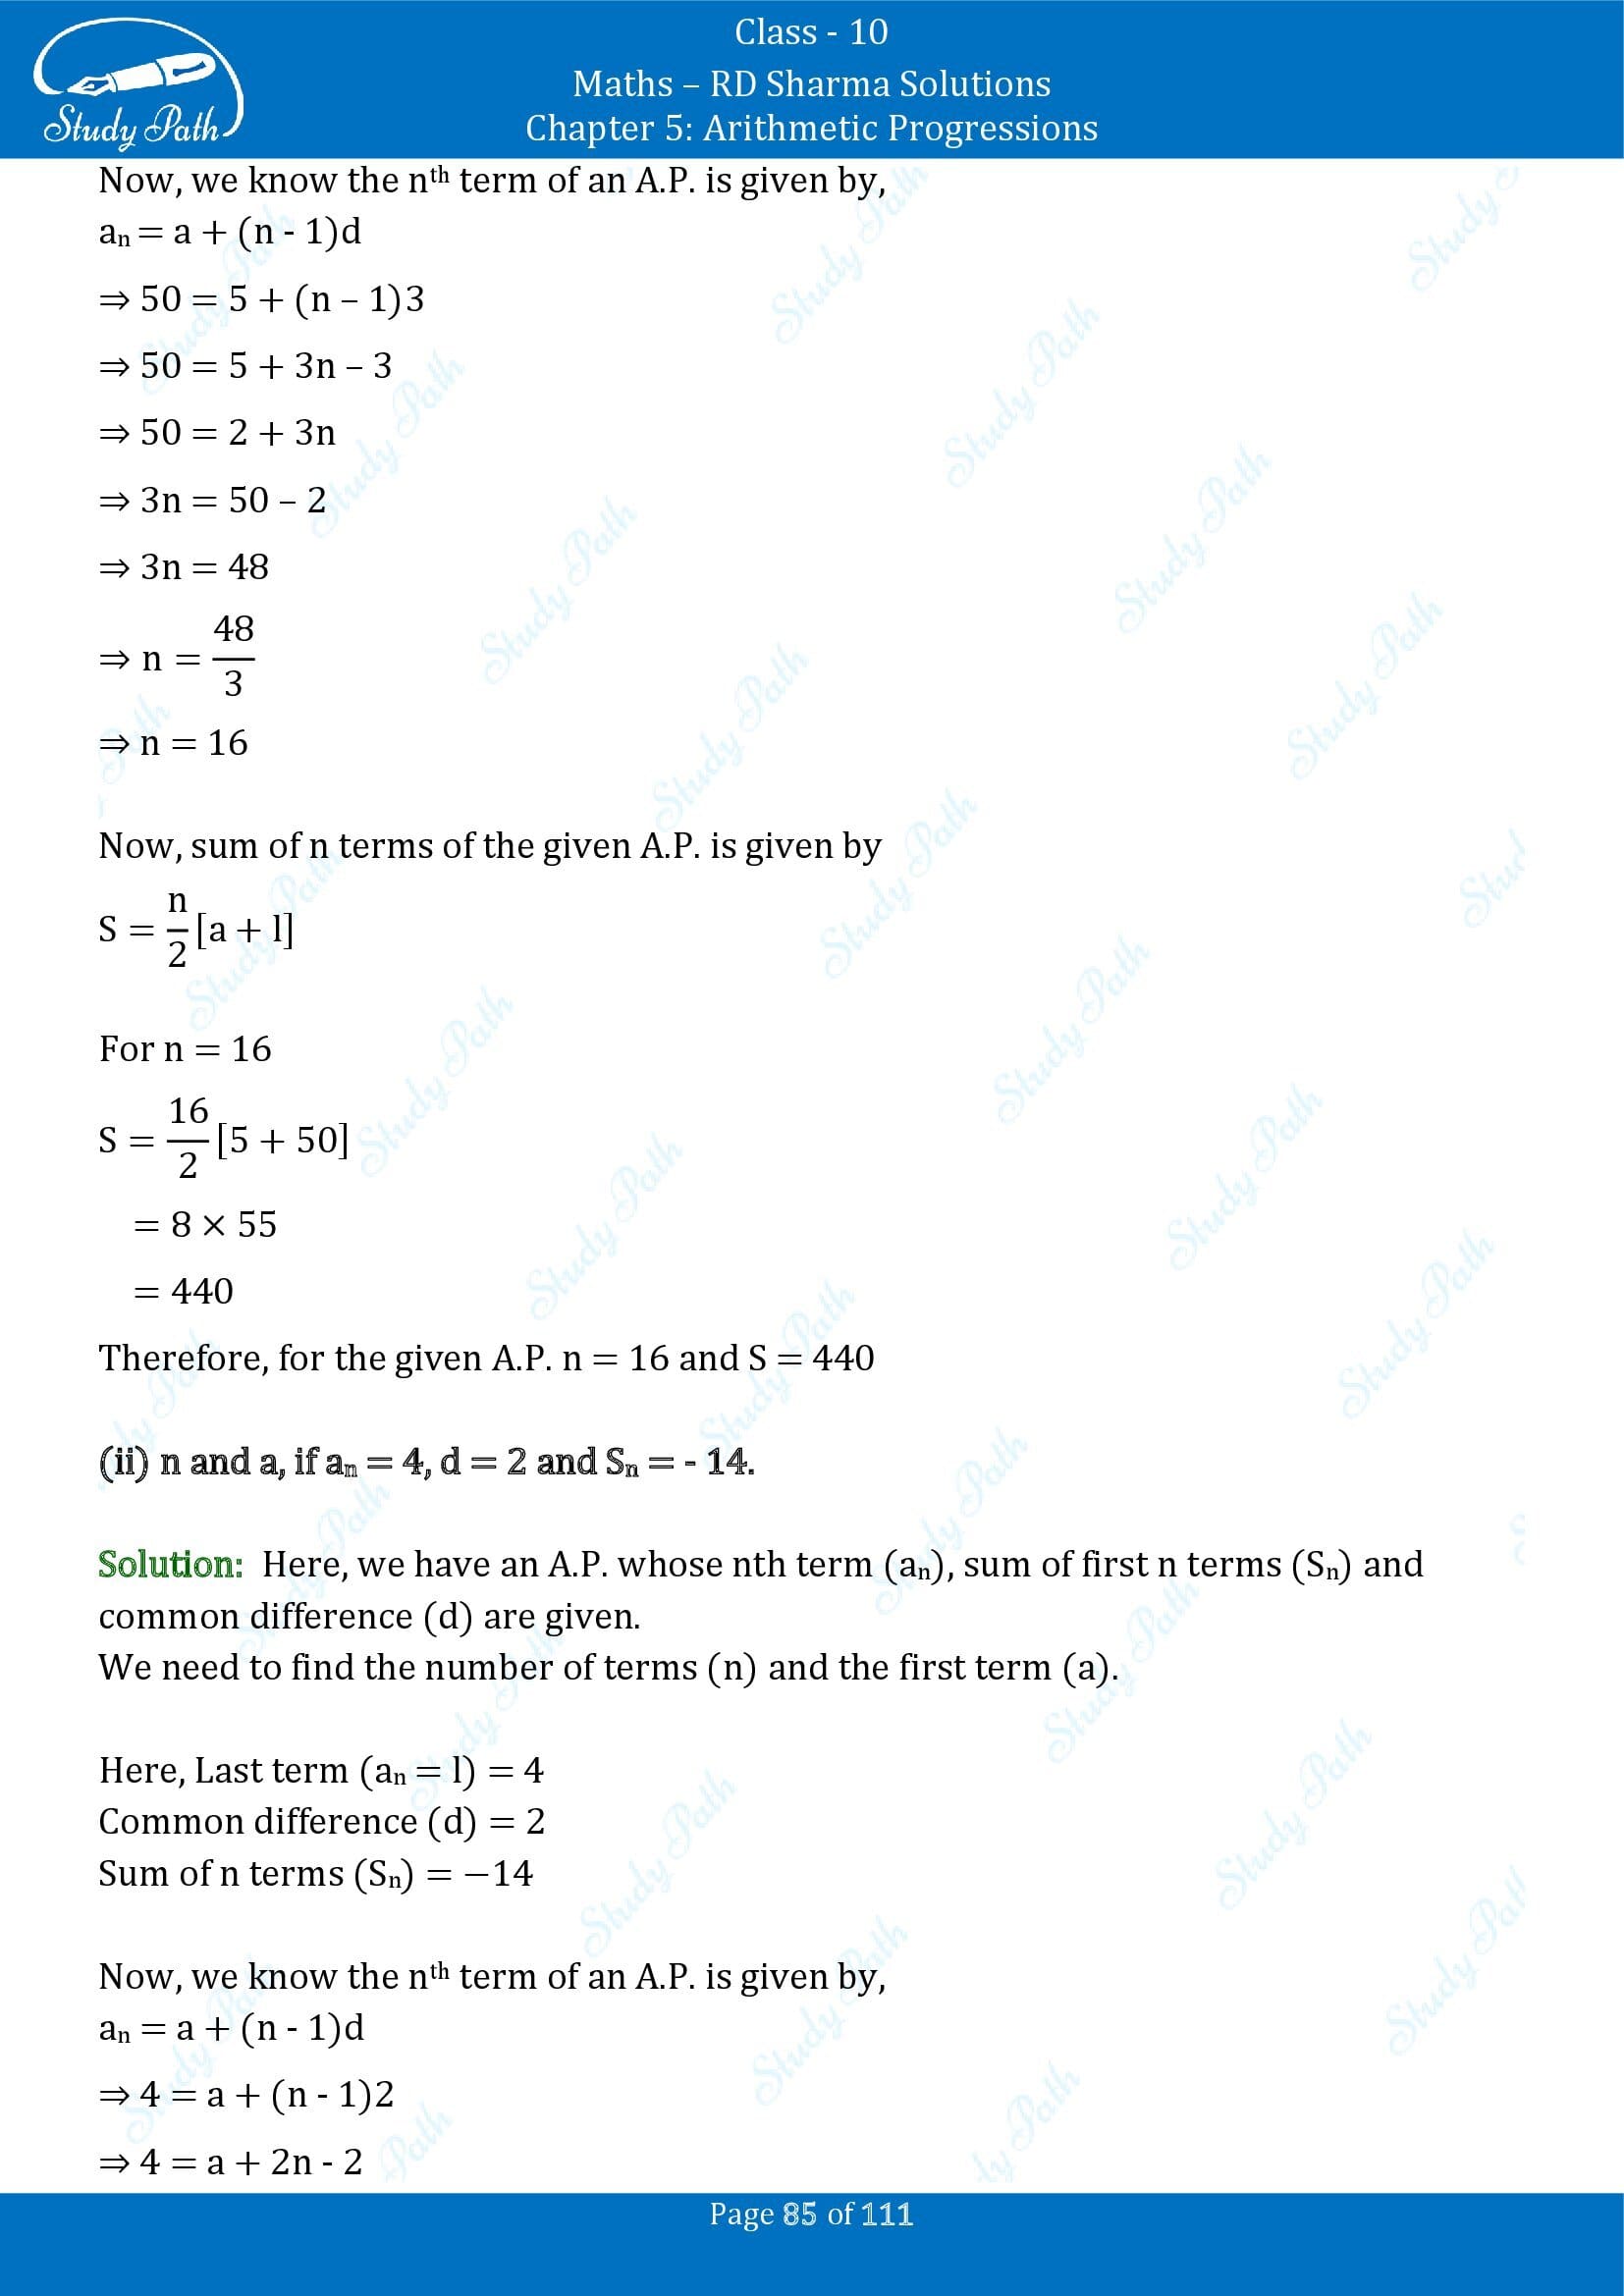 RD Sharma Solutions Class 10 Chapter 5 Arithmetic Progressions Exercise 5.6 00085